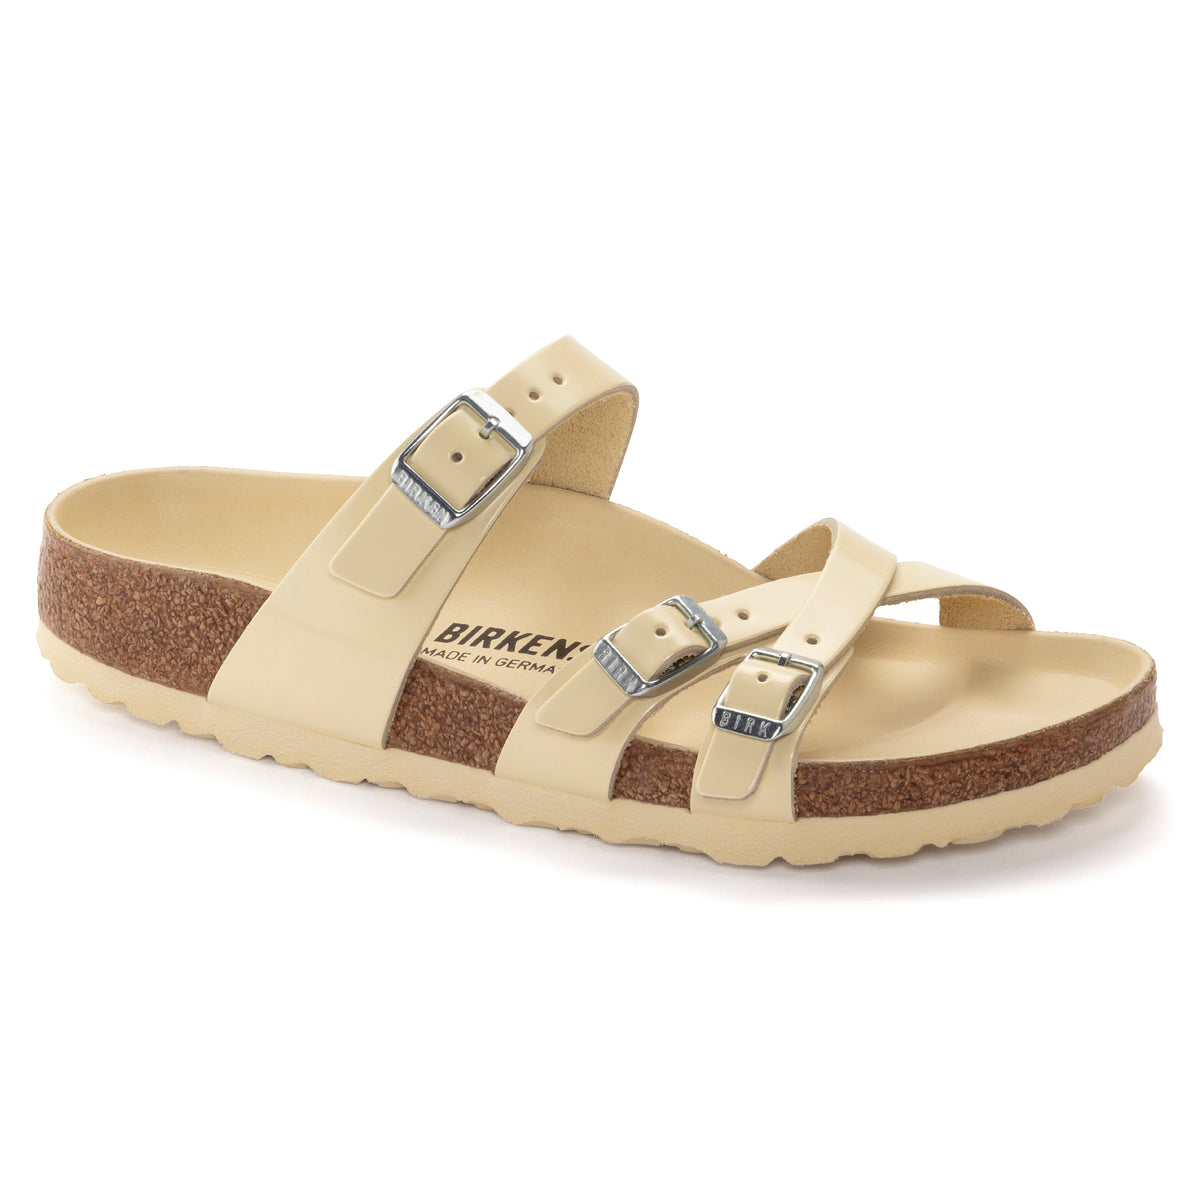 Birkenstock Limited Edition Franca Hex butter high shine leather